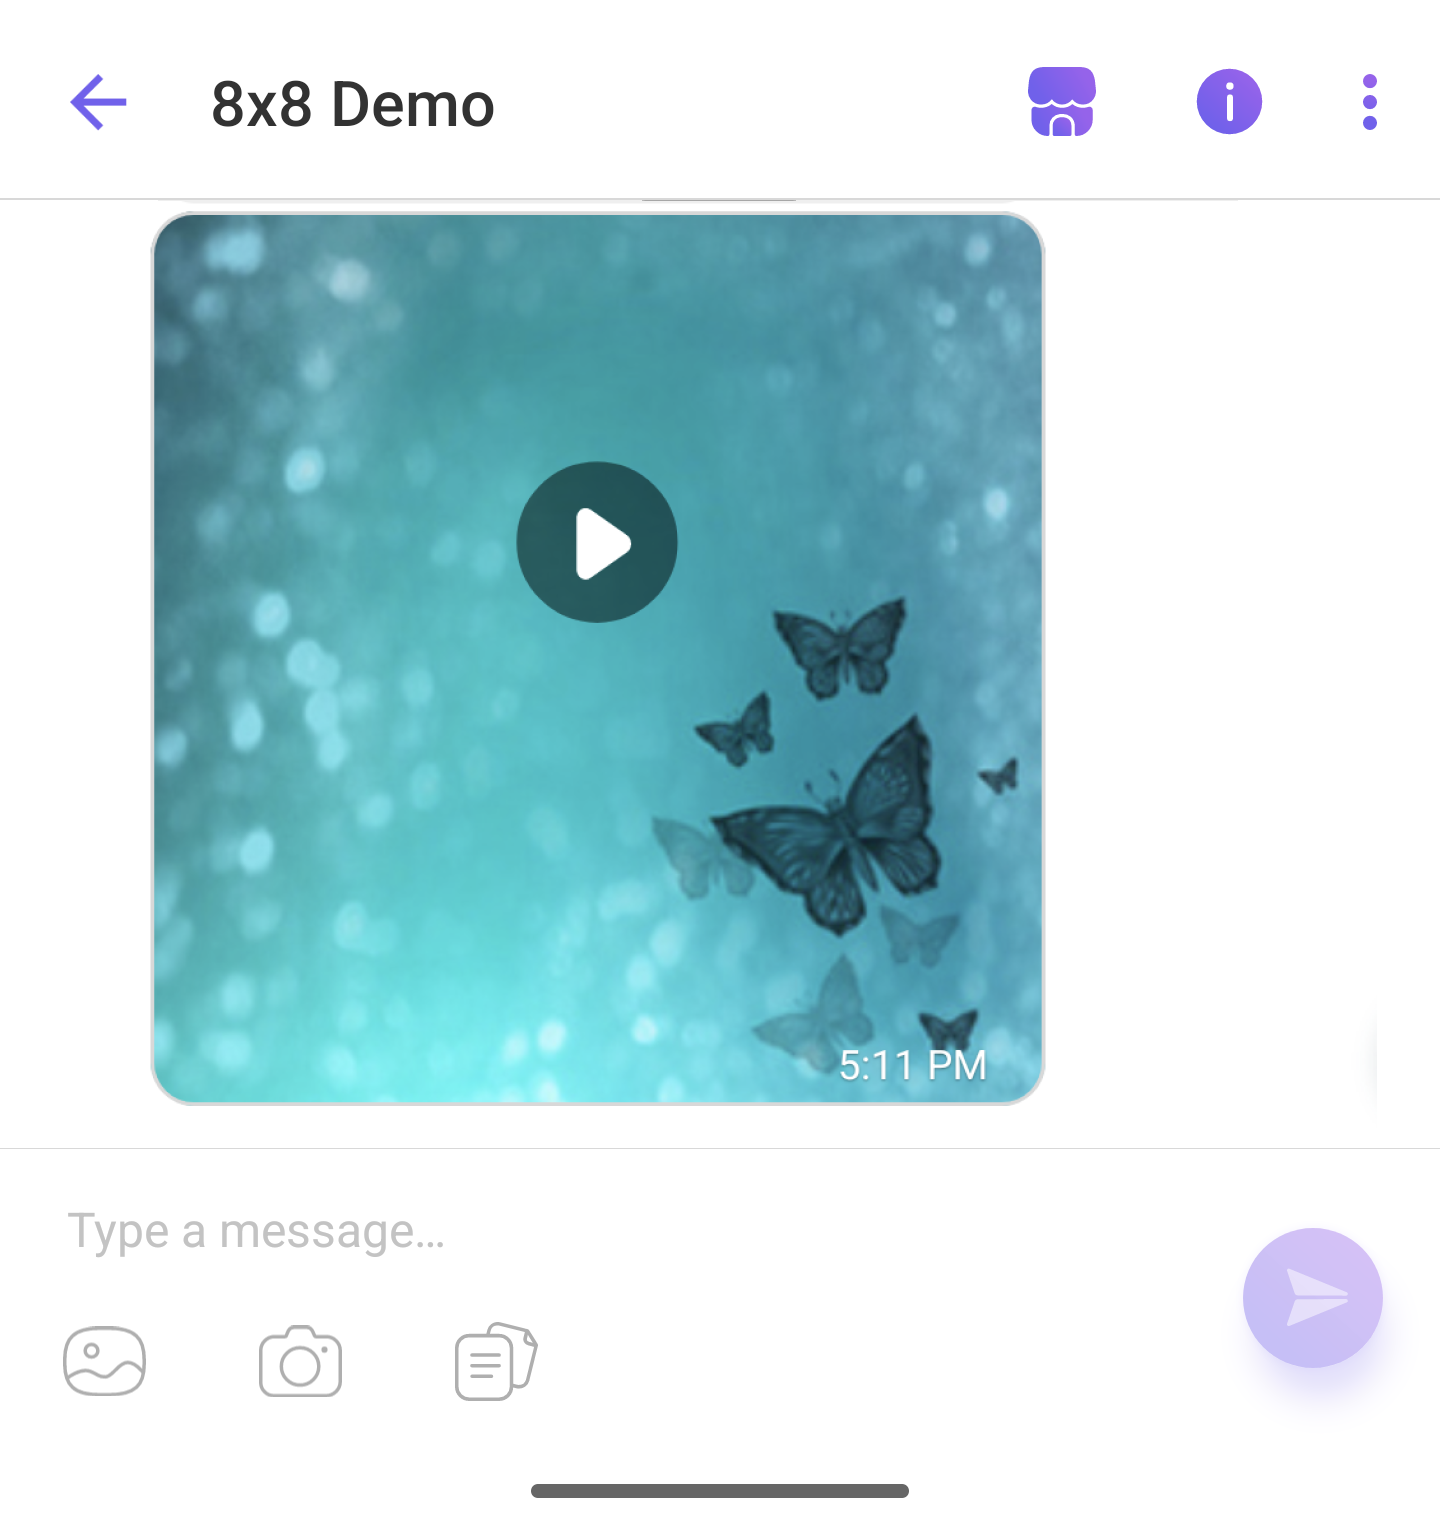 Viber Rich Media: Video-only message